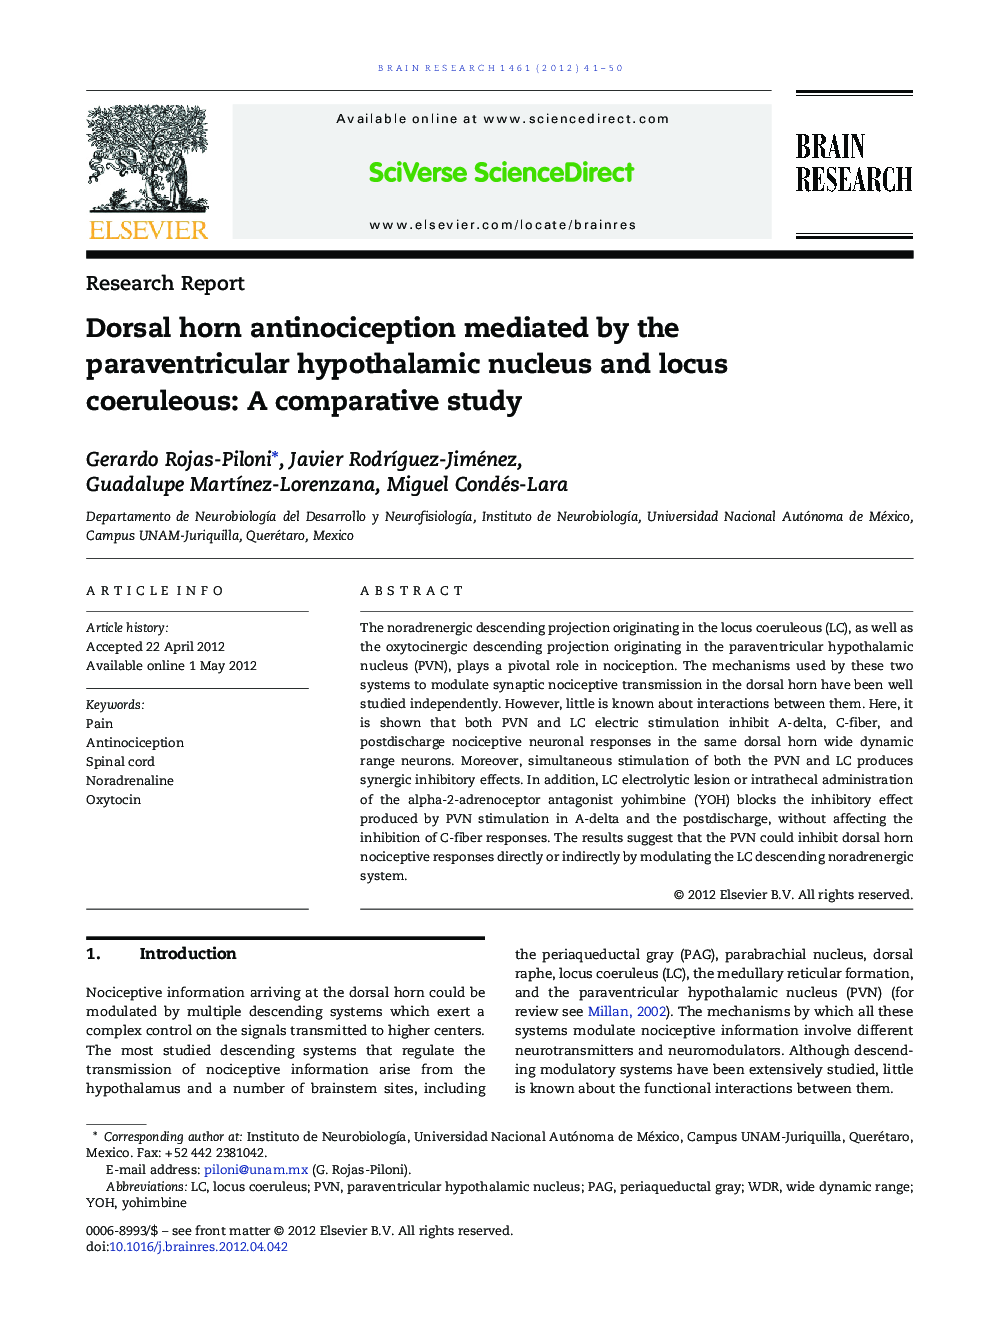 Dorsal horn antinociception mediated by the paraventricular hypothalamic nucleus and locus coeruleous: A comparative study